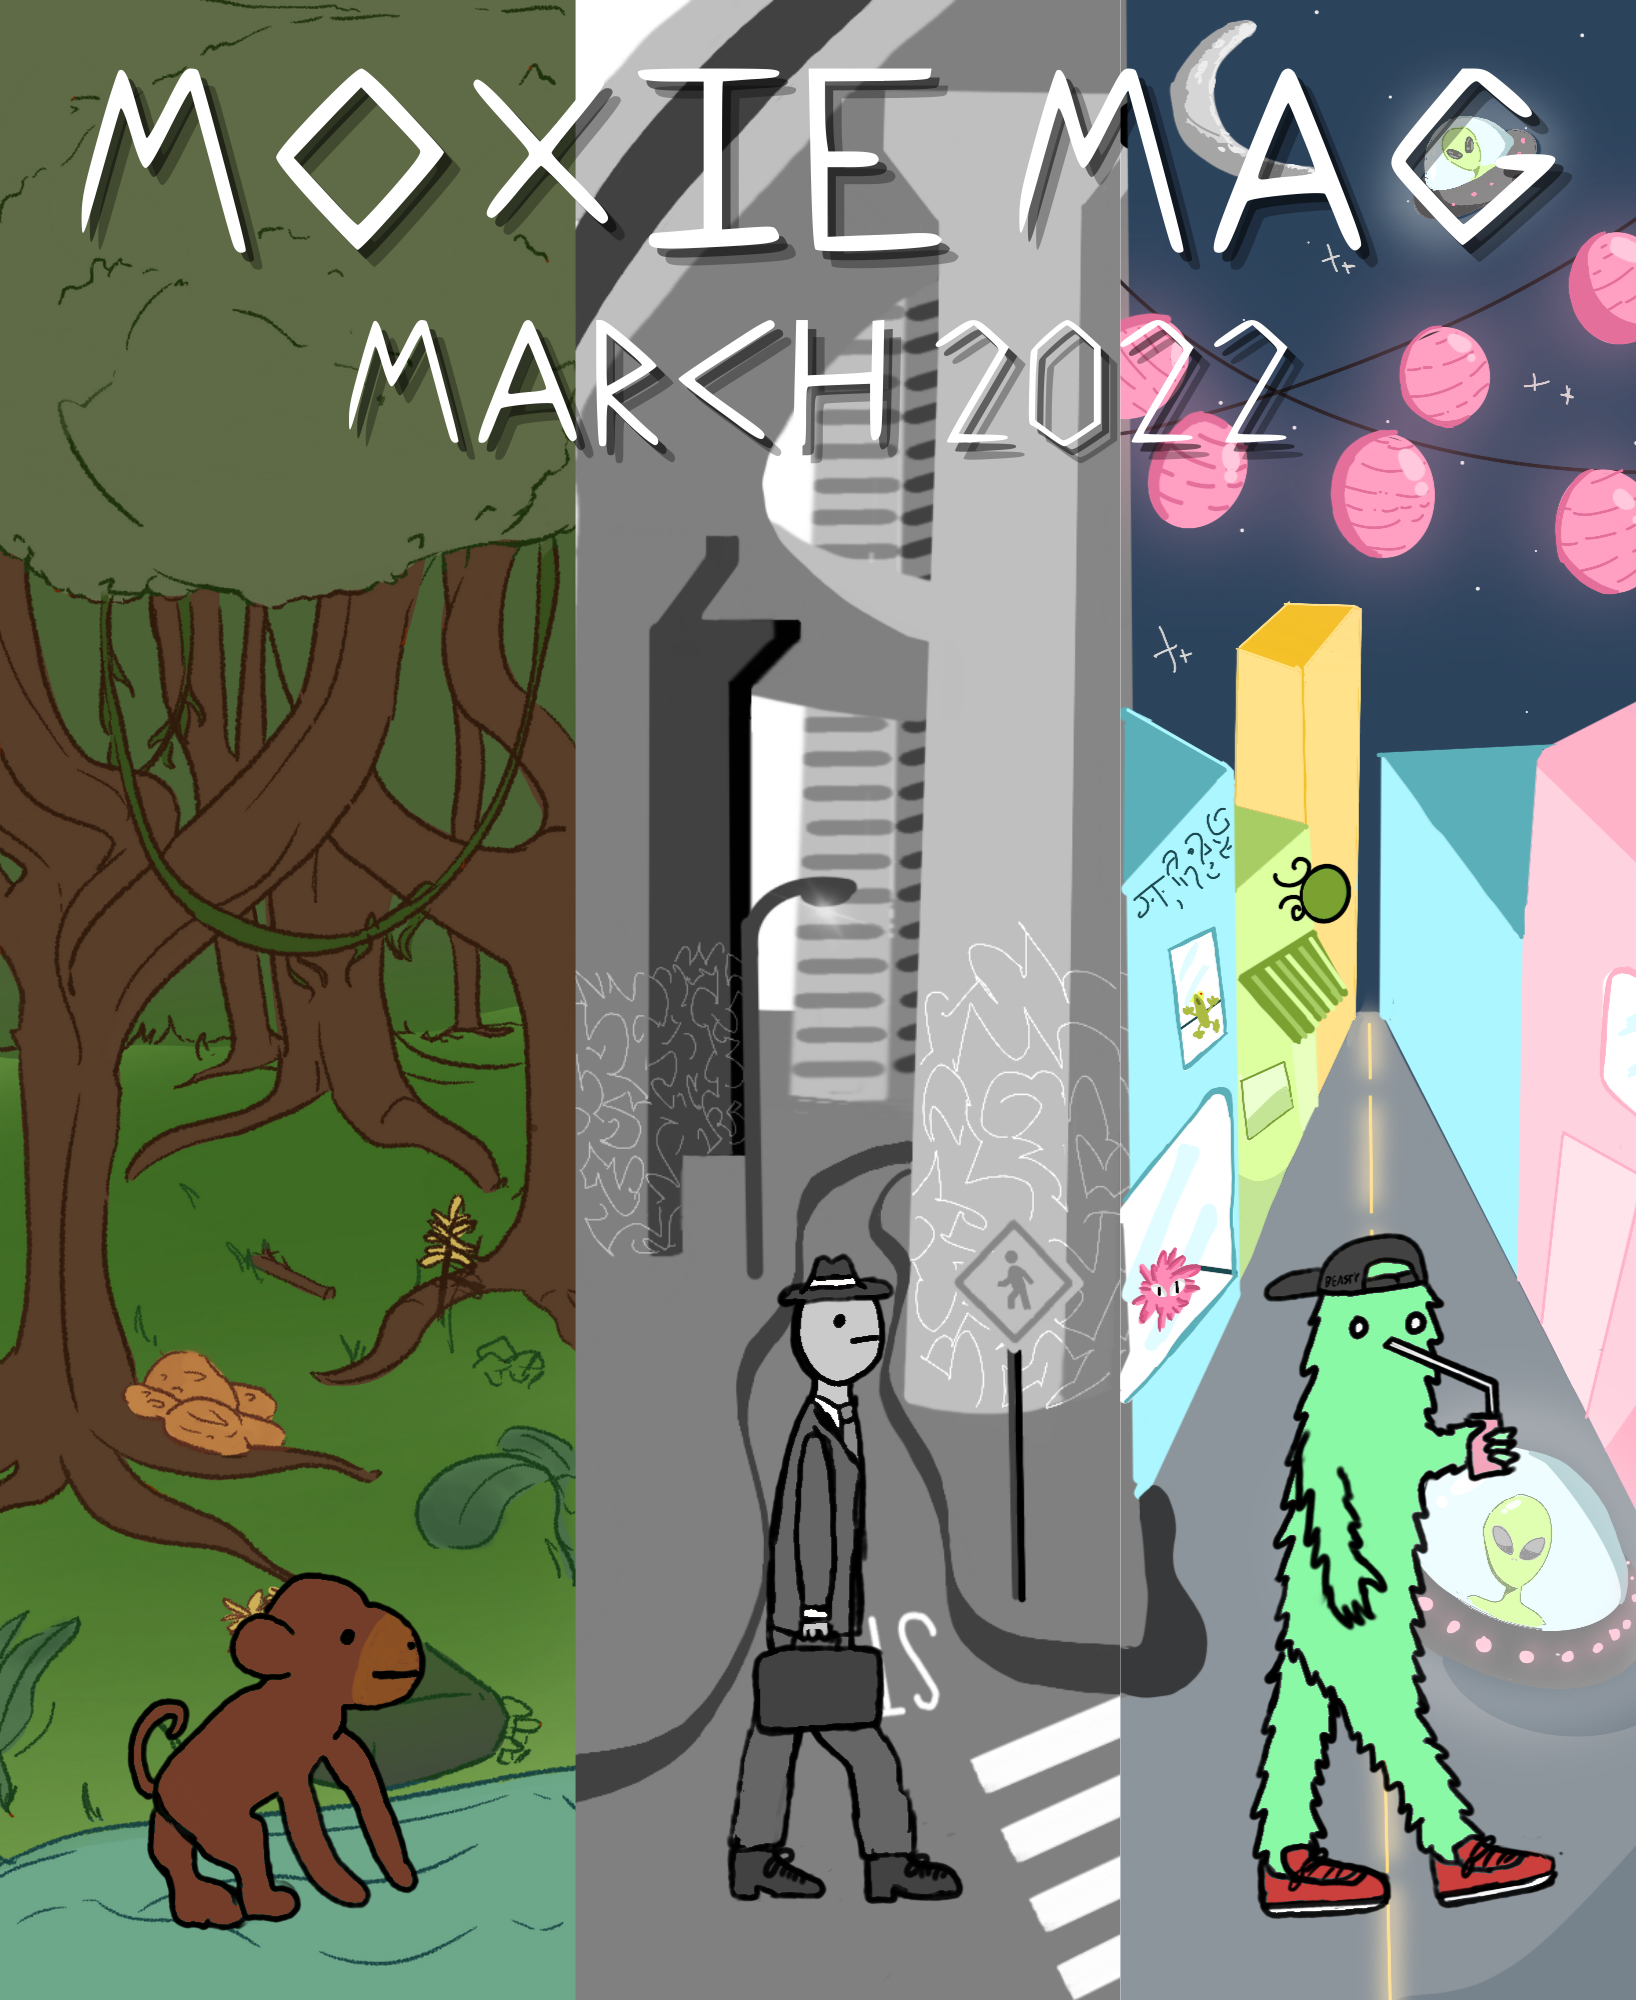 Cover of MCA Denver MoxieMag Teens March Issue. The title of the issue is on the cover, which reads “MoxieMag March 2022” in white jagged text. The cover features three different scenes: a monkey in a lush green jungle, a businessperson walking in a city, and a green fuzzy character sipping a drink under the night sky. 